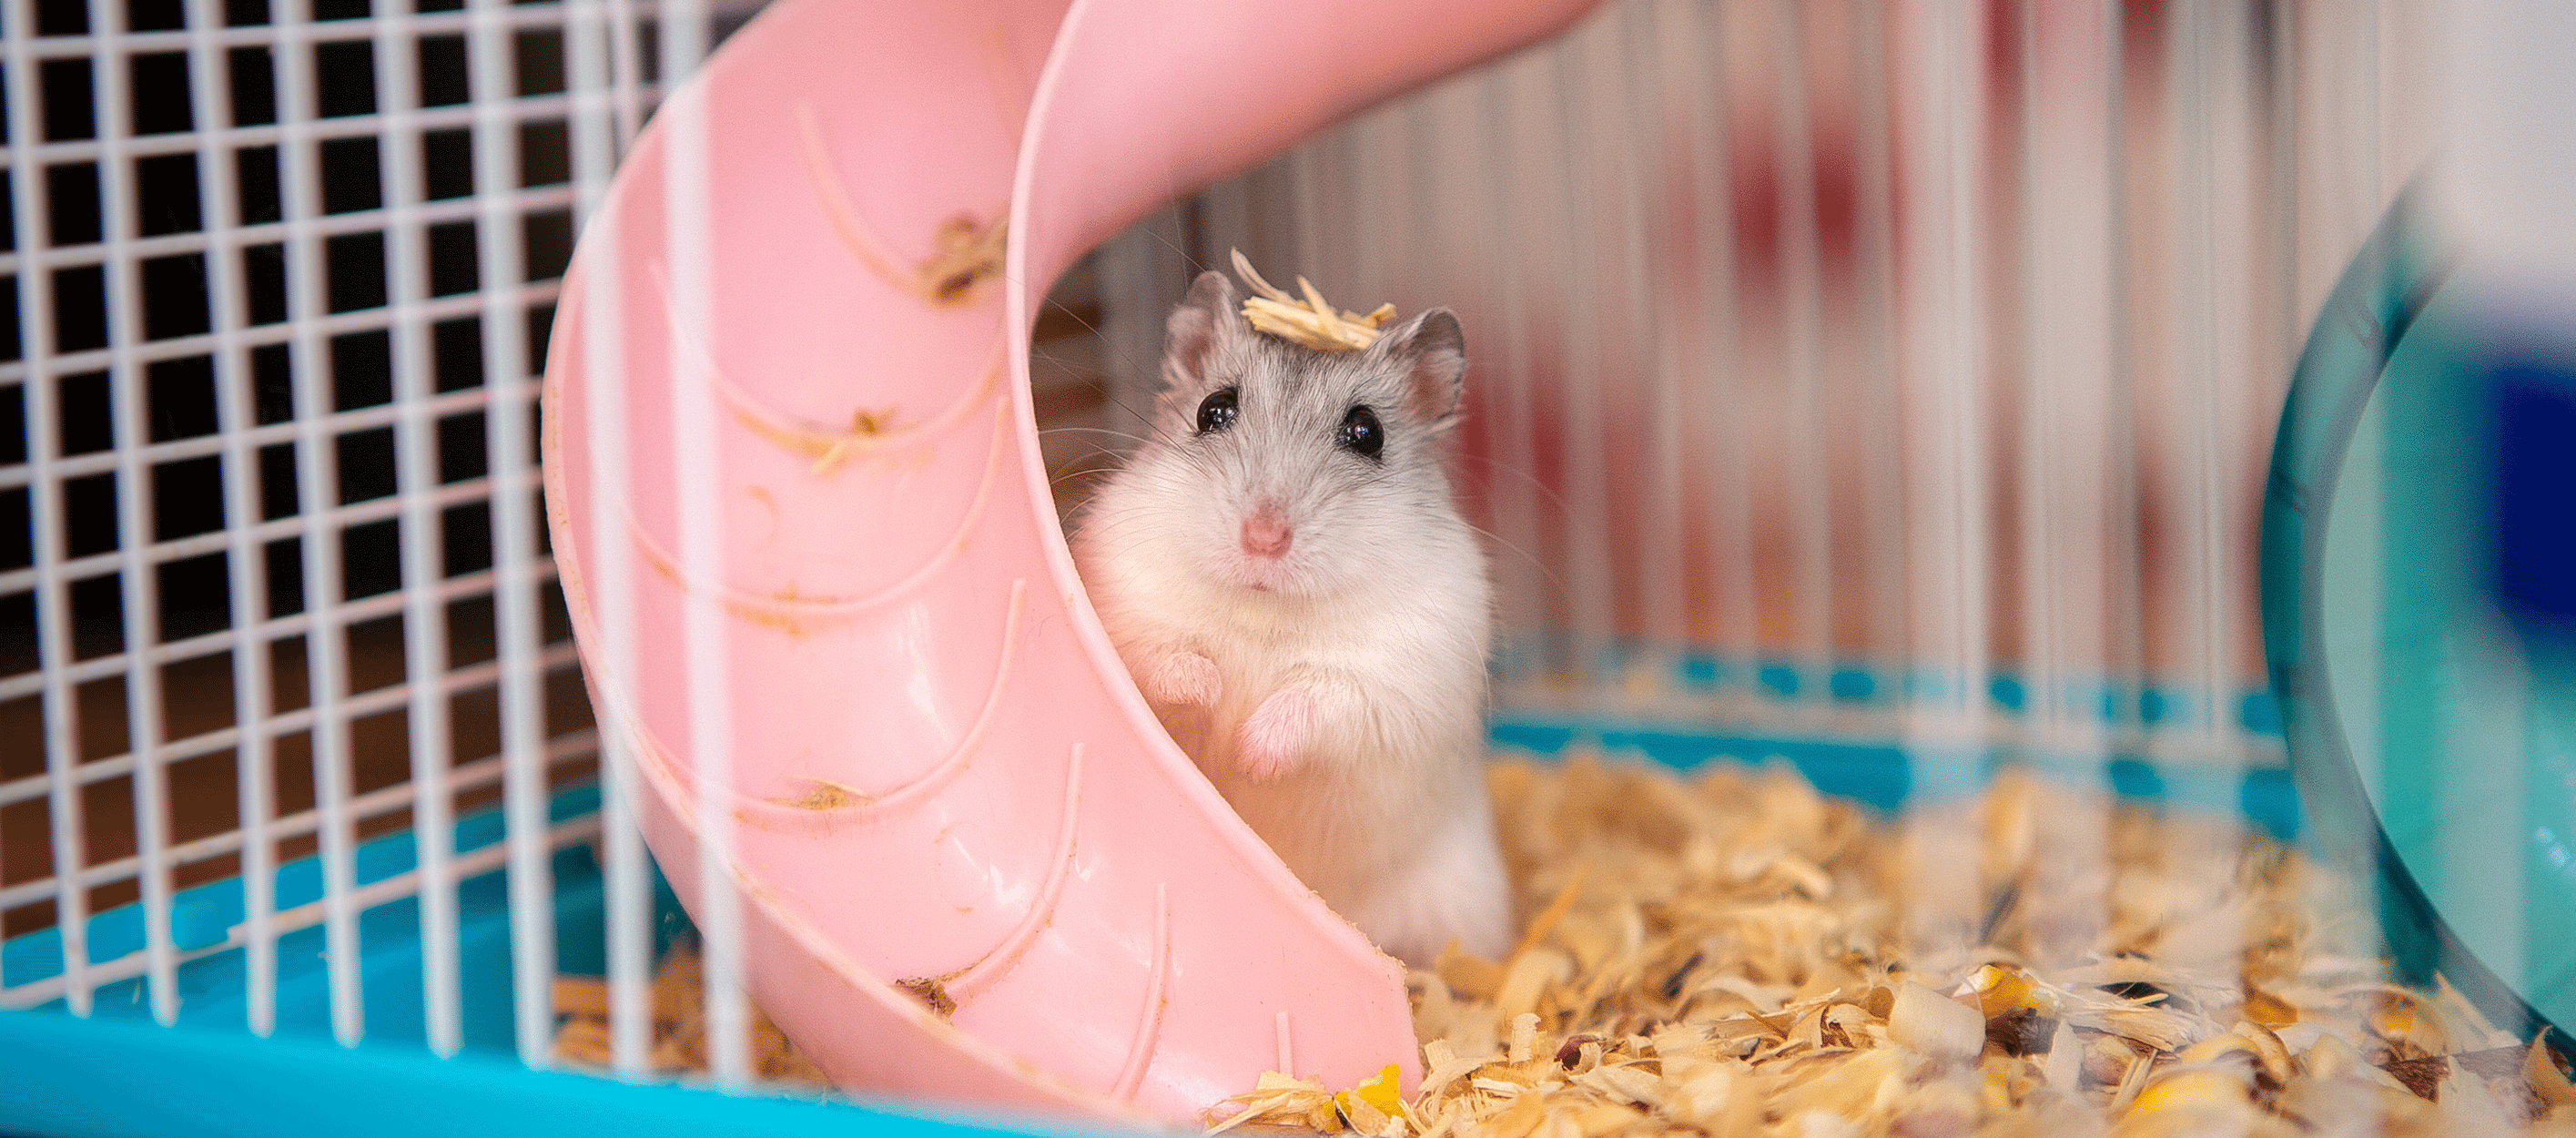 pet hampster in a cage